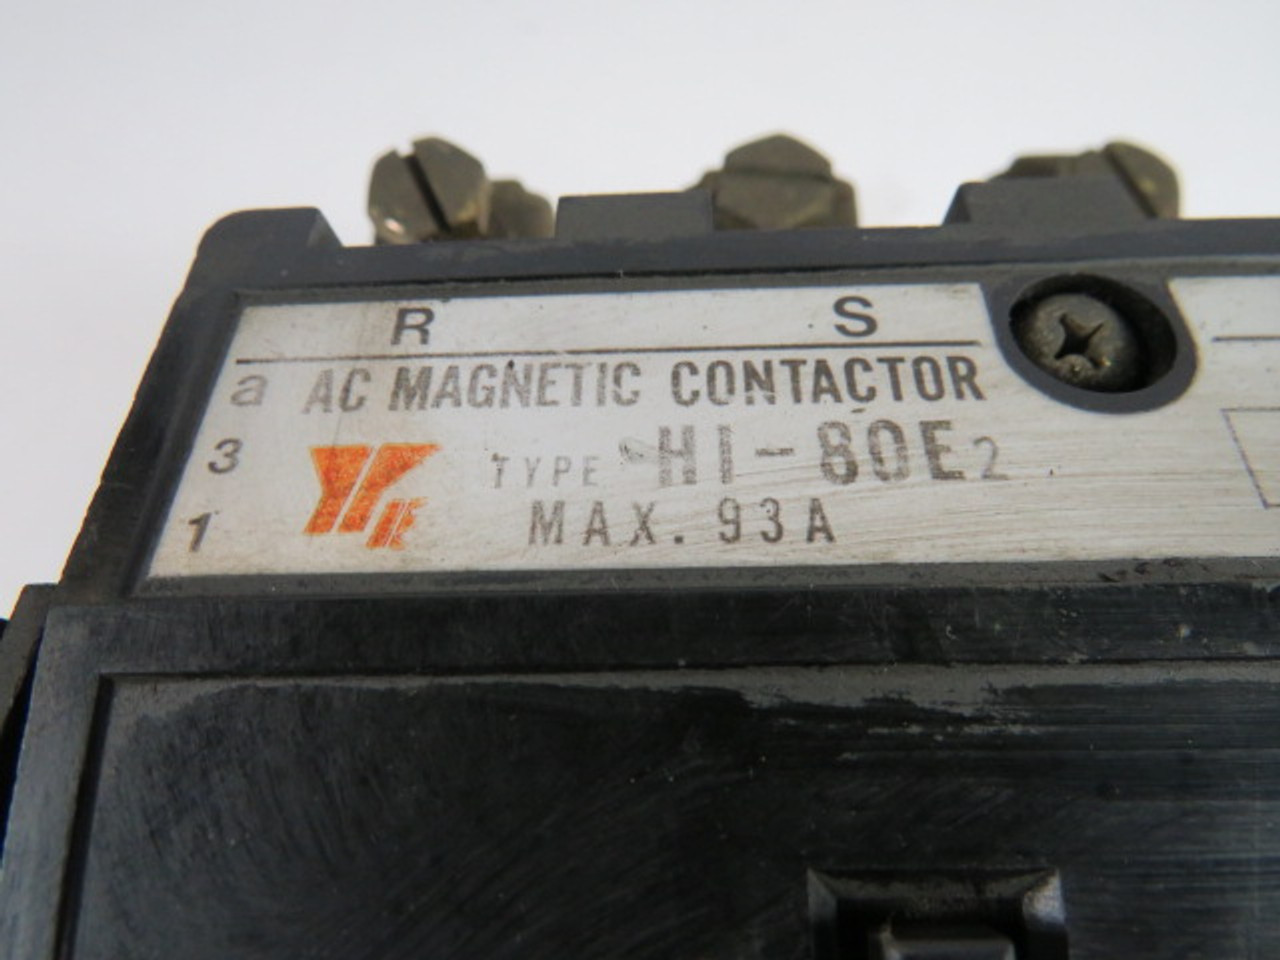 Yaskawa Electric HI-80E2 Magnetic Contactor 180-200/200-220V 50/60Hz USED